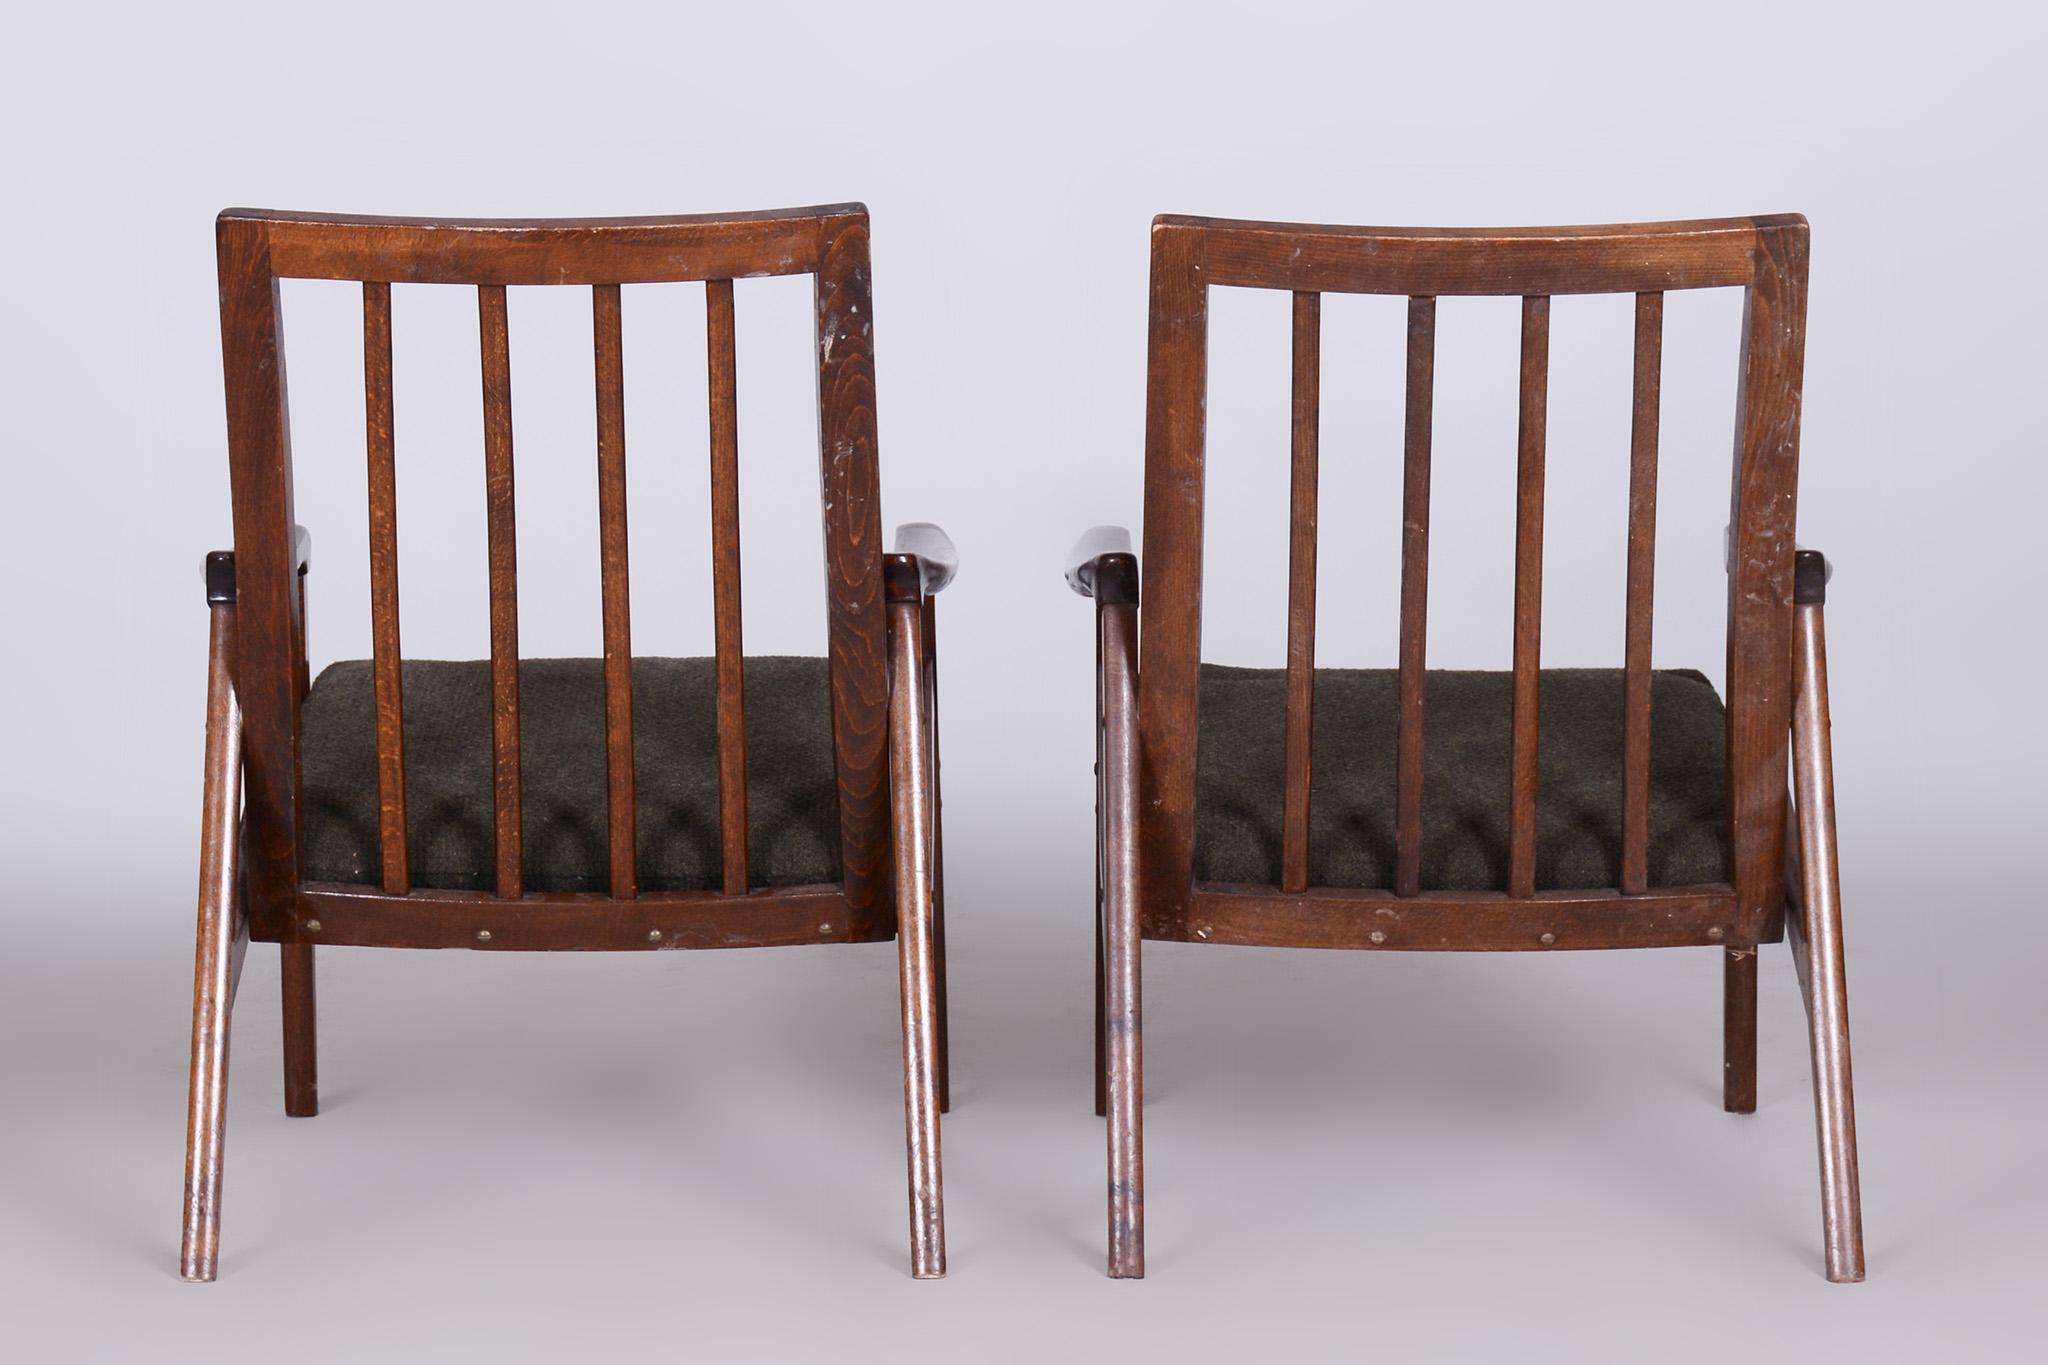 Pair of Mid-Century Armchairs, Stained Beech, Revived Polish, Czechia, 1960s For Sale 3